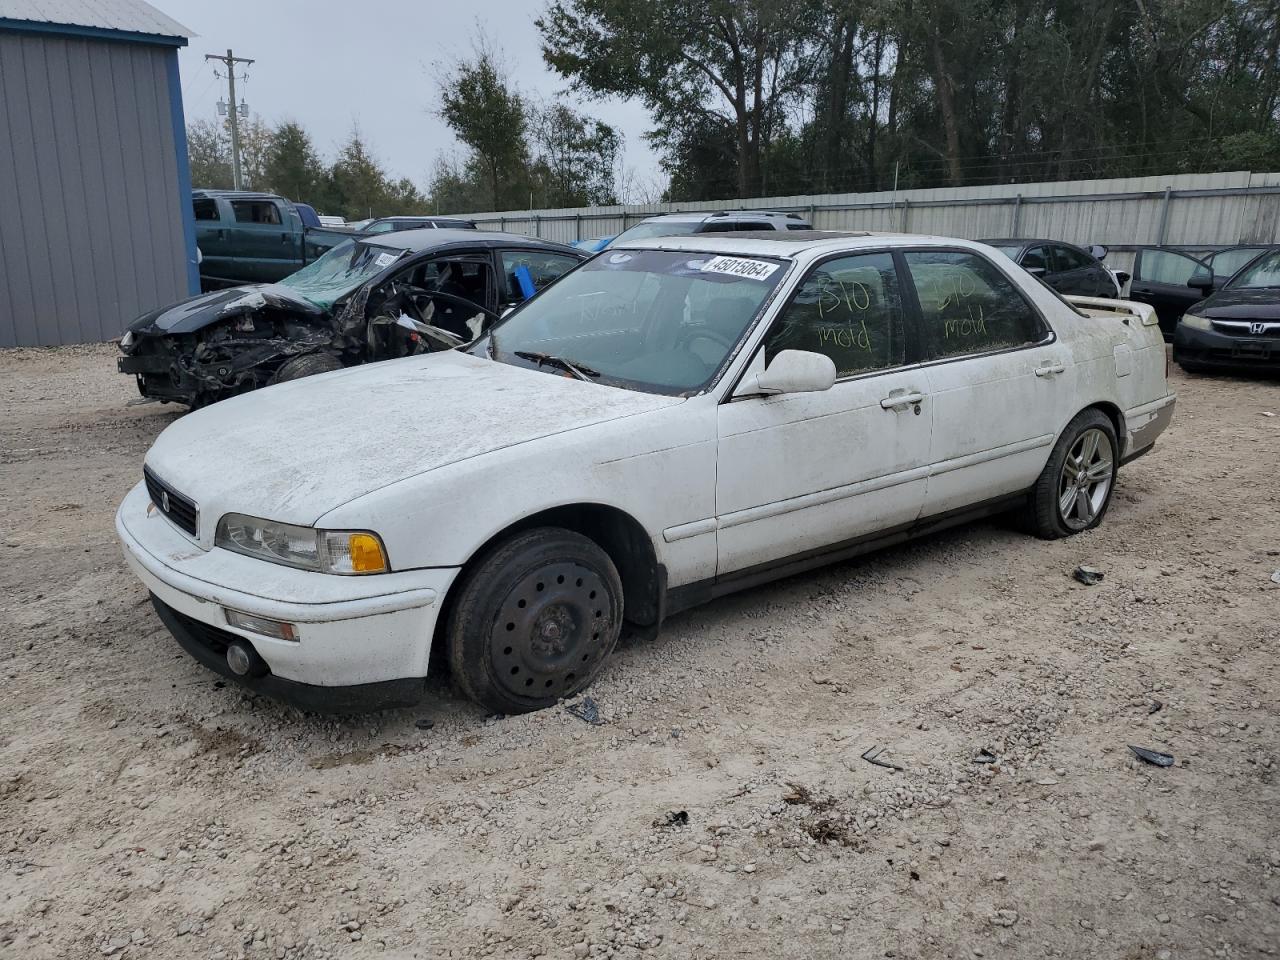 vin: JH4KA7696SC012710 JH4KA7696SC012710 1995 acura legend 3200 for Sale in 32343 6677, Fl - Tallahassee, Midway, USA